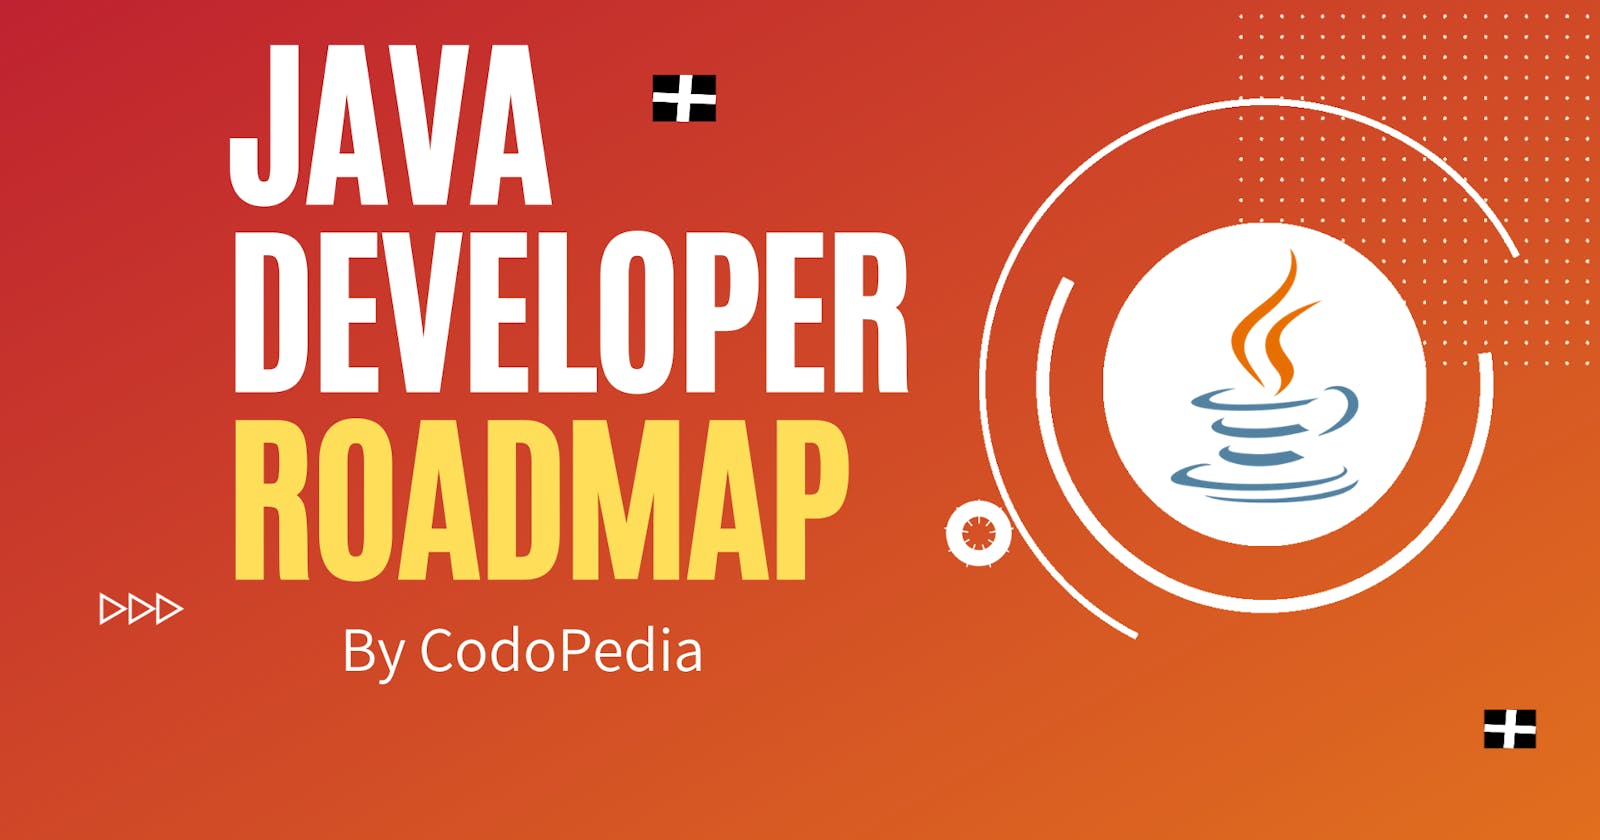 Java Road Map — How To Become A Java Developer?